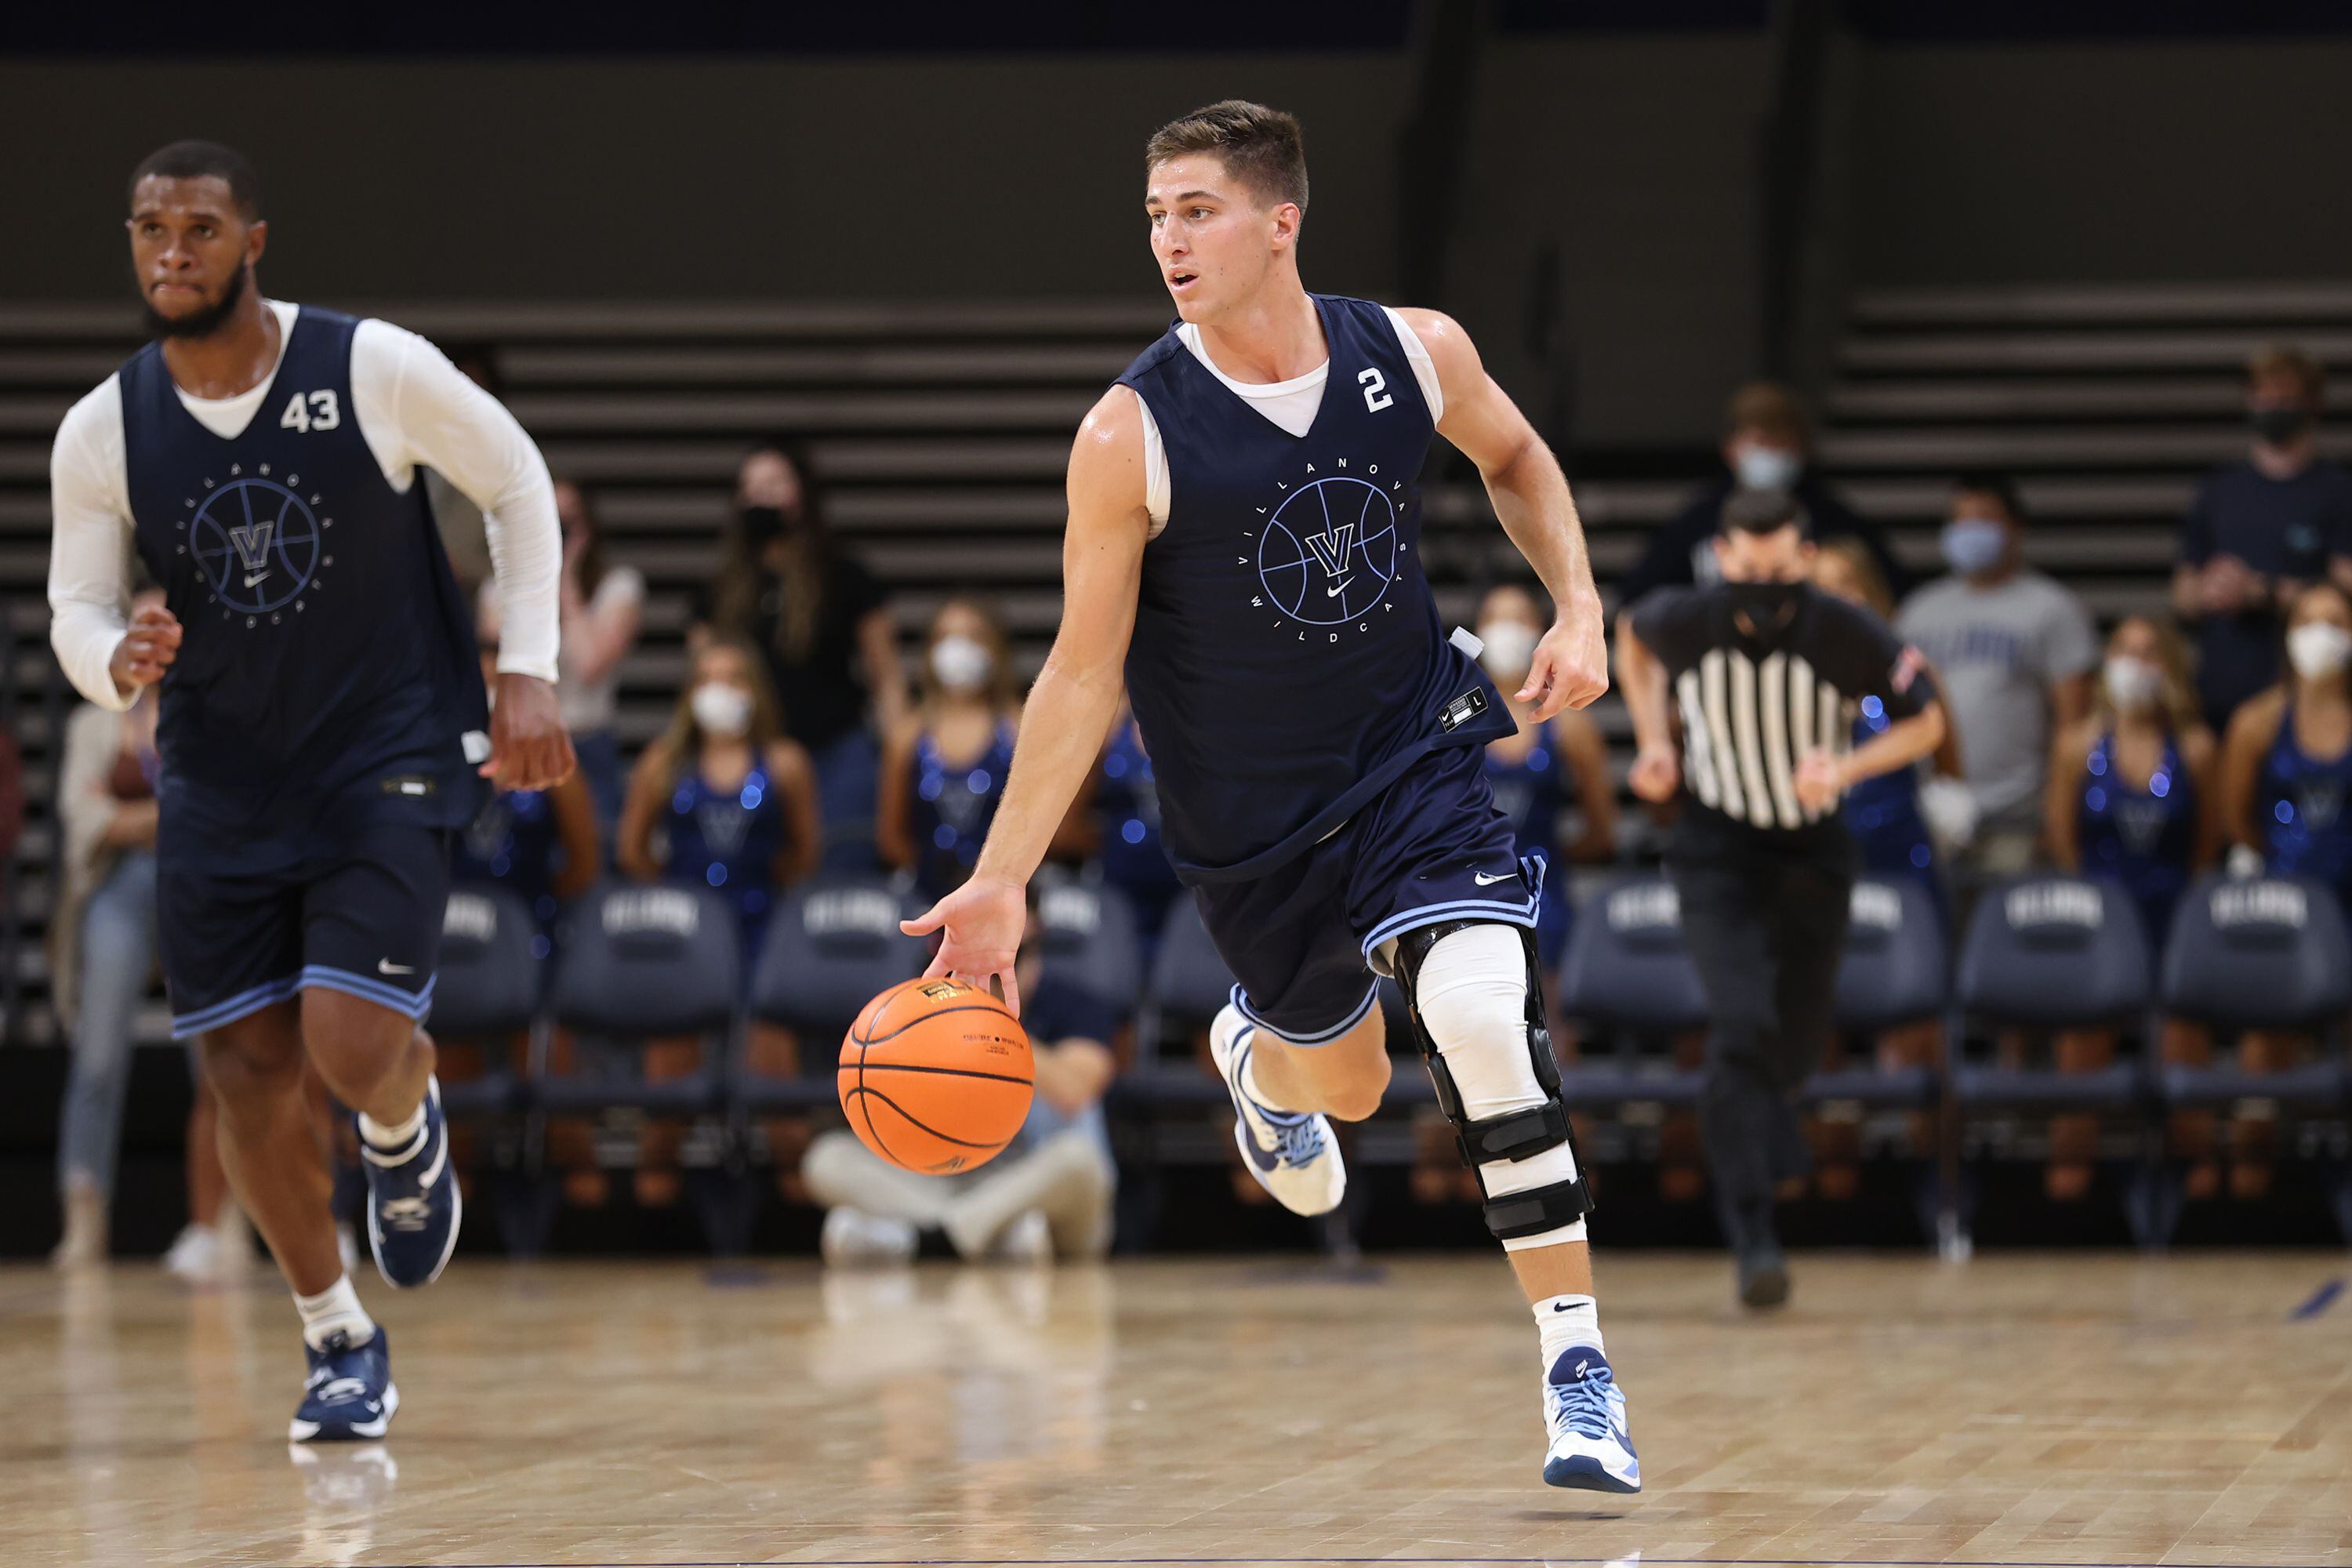 Villanova's Gillespie Was Ready for His Opportunity - Big East Conference